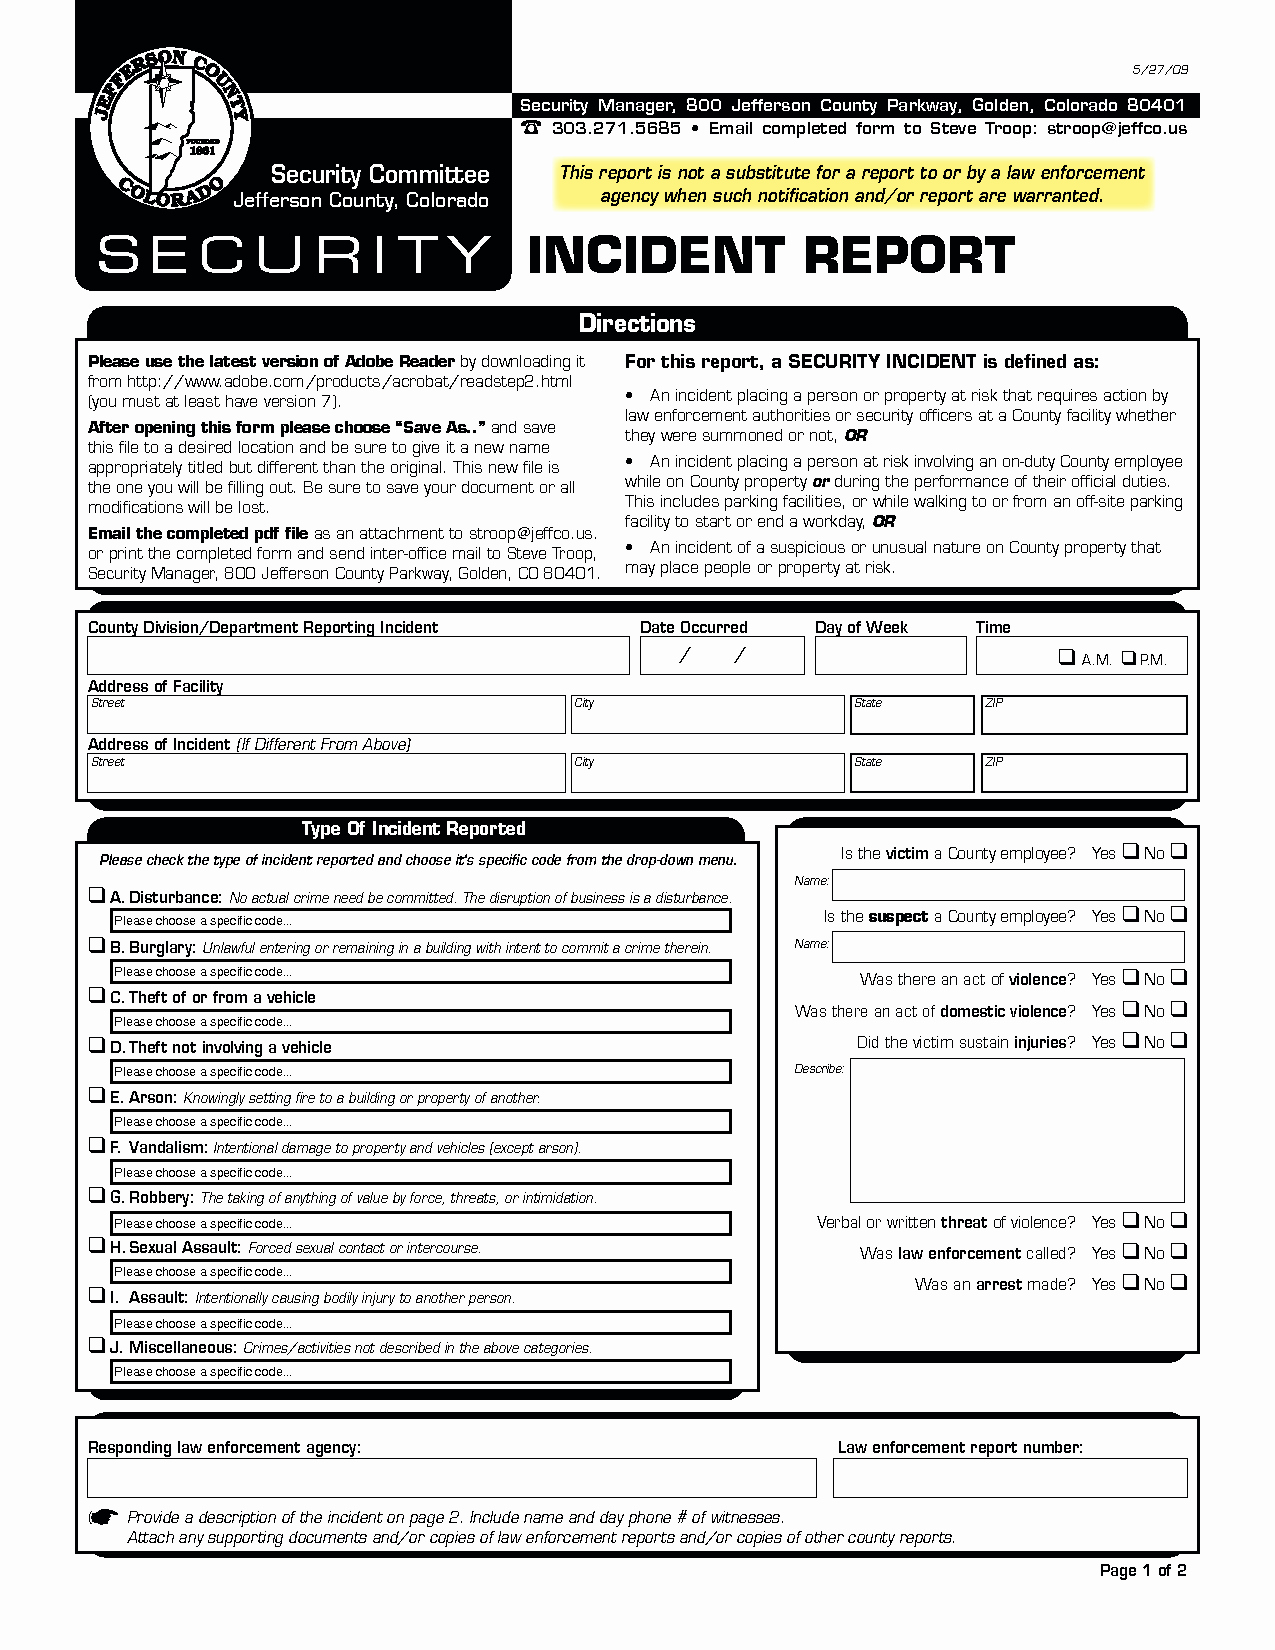 Security Incident Report Template Word Best Of Best S Of Security Incident Report Template